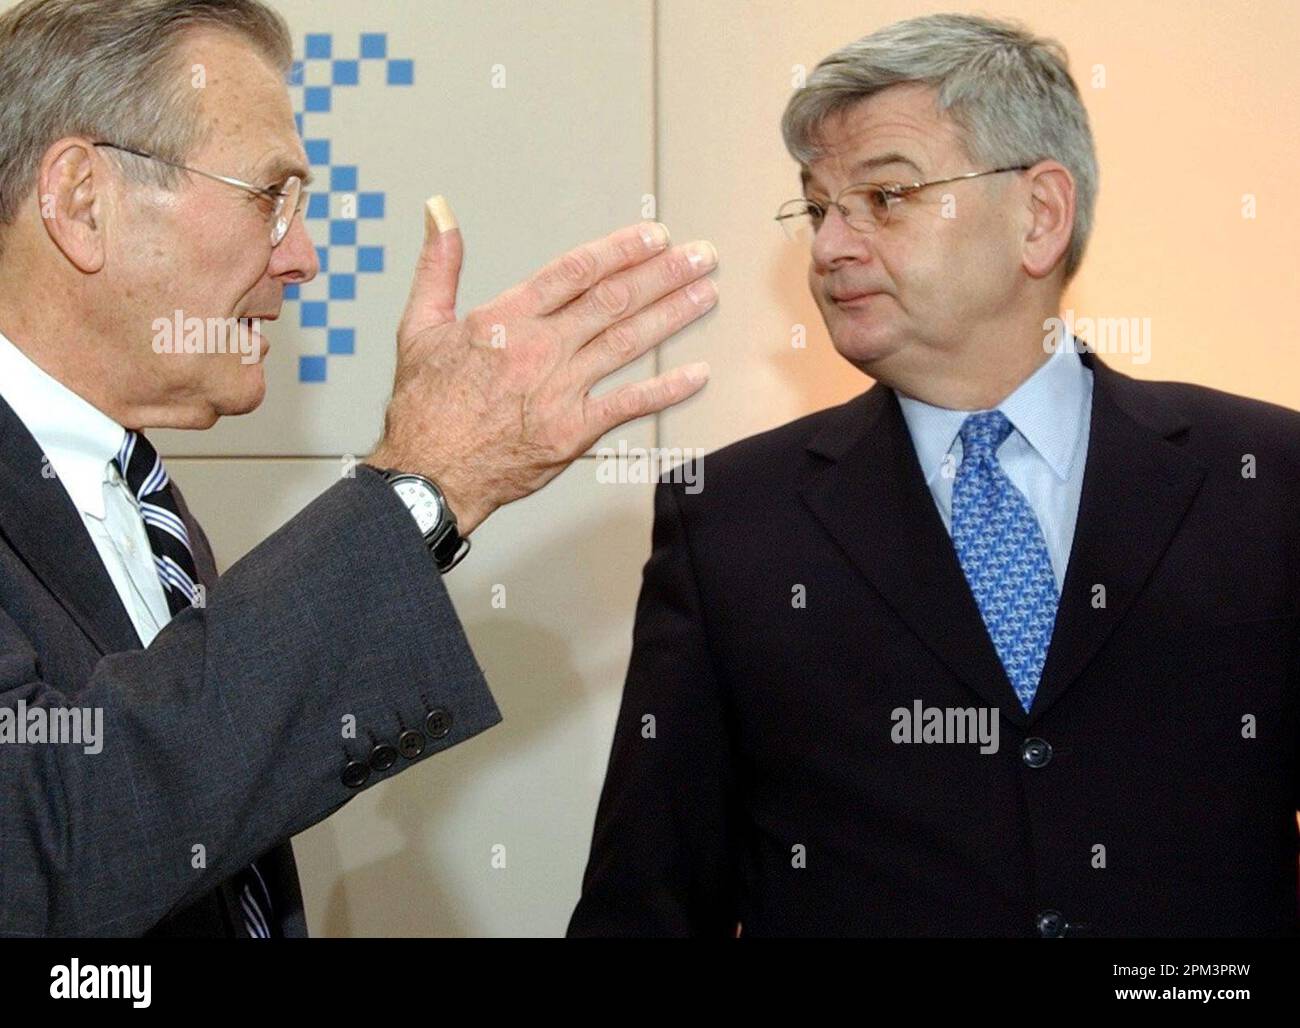 Munich, Germany. 08th Feb, 2003. With his hand raised, then U.S. Defense Secretary Donald Rumsfeld (l) talks with then German Foreign Minister Joschka Fischer at the start of the 39th International Security Conference in Munich. Fischer, parliamentary group spokesman for Alliance 90/The Greens in the German Bundestag from 1994 to 1998, and foreign minister and vice chancellor of the Federal Republic of Germany from 1998 to 2005, was born in Gerabronn in Baden-Württemberg on April 12, 1948. Credit: Matthias Schrader/dpa/Alamy Live News Stock Photo